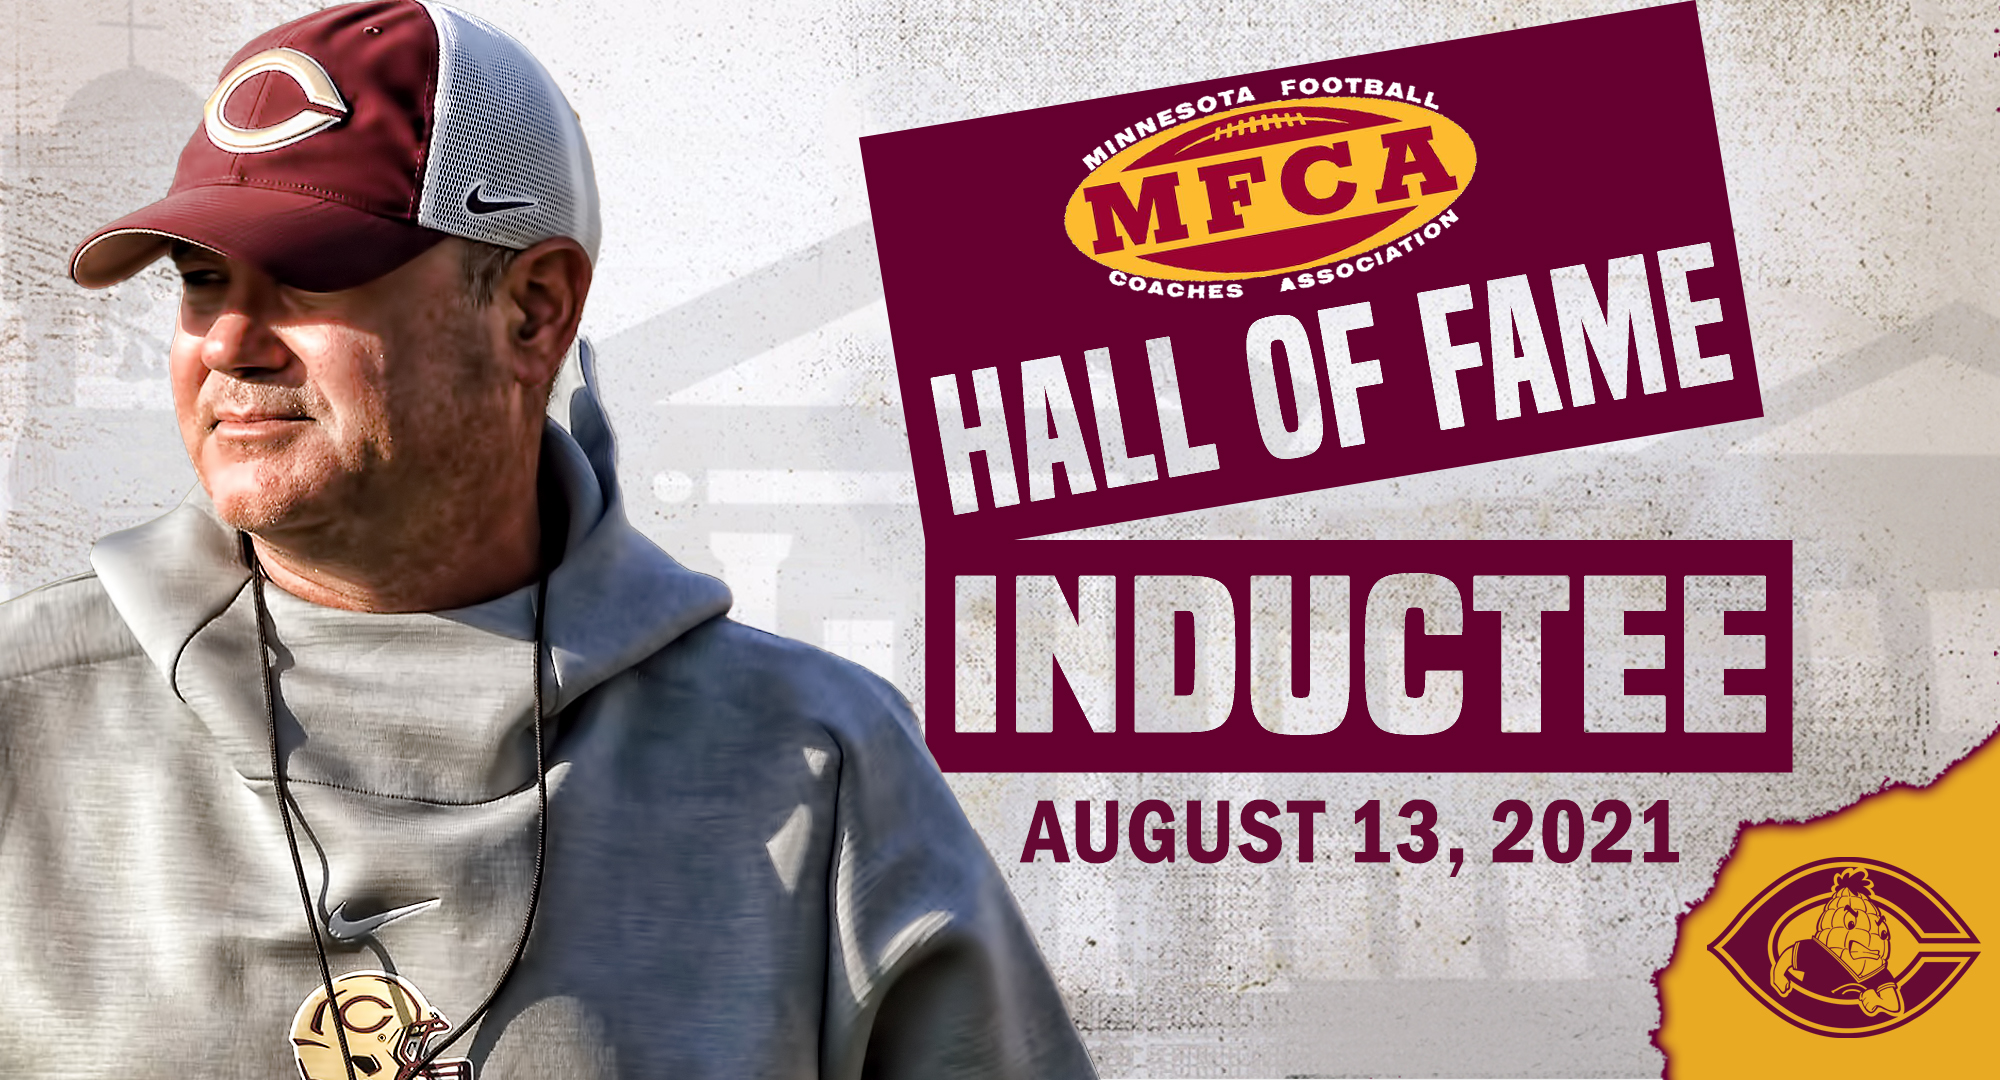 Concordia head coach Terry Horan will be inducted into the Minnesota Football Coaches Association (MFCA) Hall of Fame on Friday, August 13.